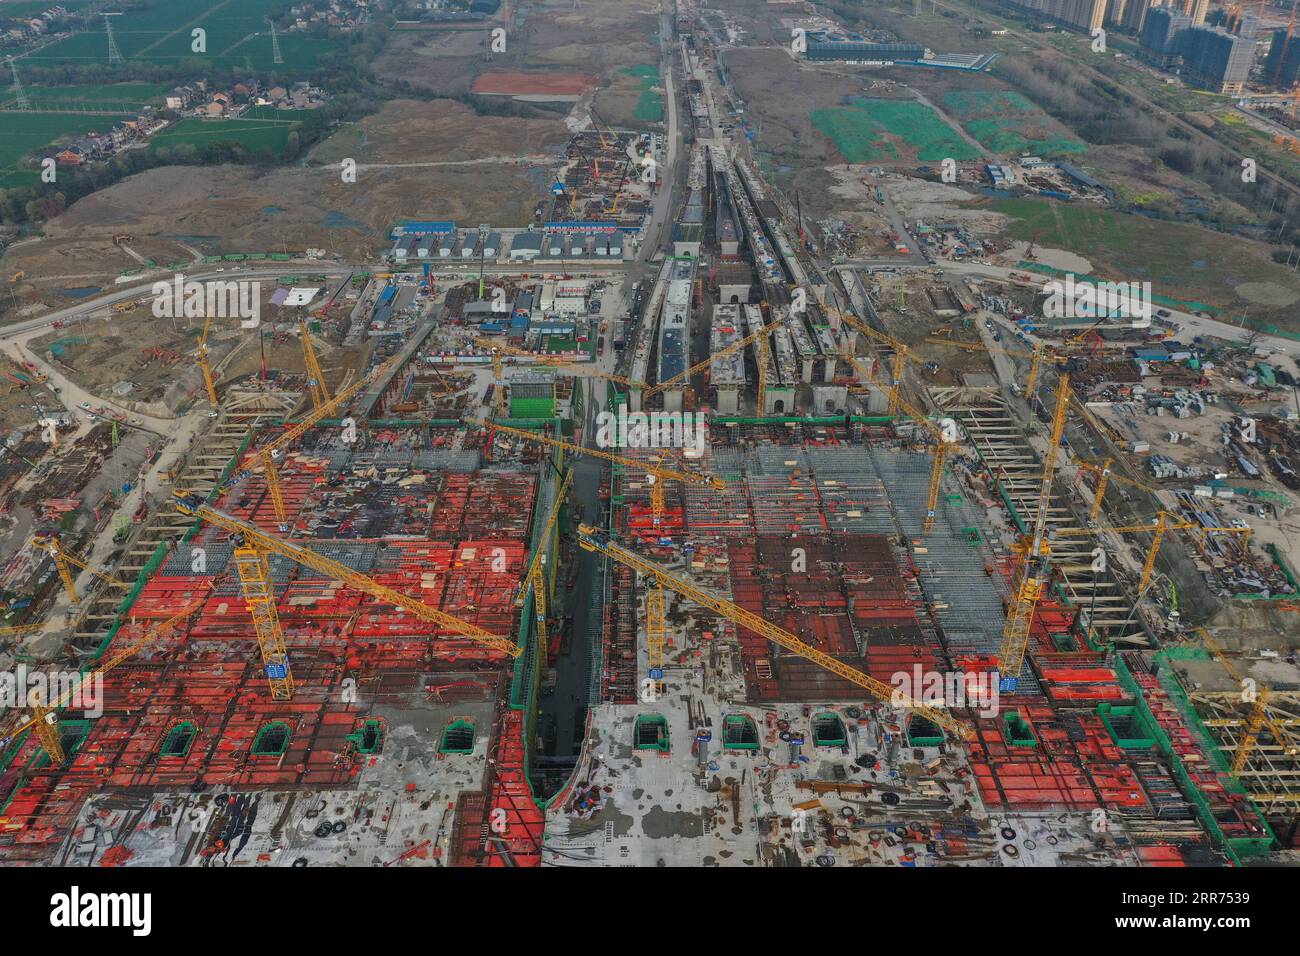 210312 -- HANGZHOU, March 12, 2021 -- Aerial photo taken on March 12, 2021 shows the construction site of Hangzhou West Railway Station in Hangzhou, capital of east China s Zhejiang Province. Hangzhou West Railway Station is a key support project for the 2022 Asian Games, and also a part of Hangzhou s grand plans to step up the infrastructure of the city. The construction of the comprehensive transportation hub that integrates multiple means of transportation is well underway.  CHINA-HANGZHOU-TRANSPORTATION HUB-CONSTRUCTION CN HuangxZongzhi PUBLICATIONxNOTxINxCHN Stock Photo